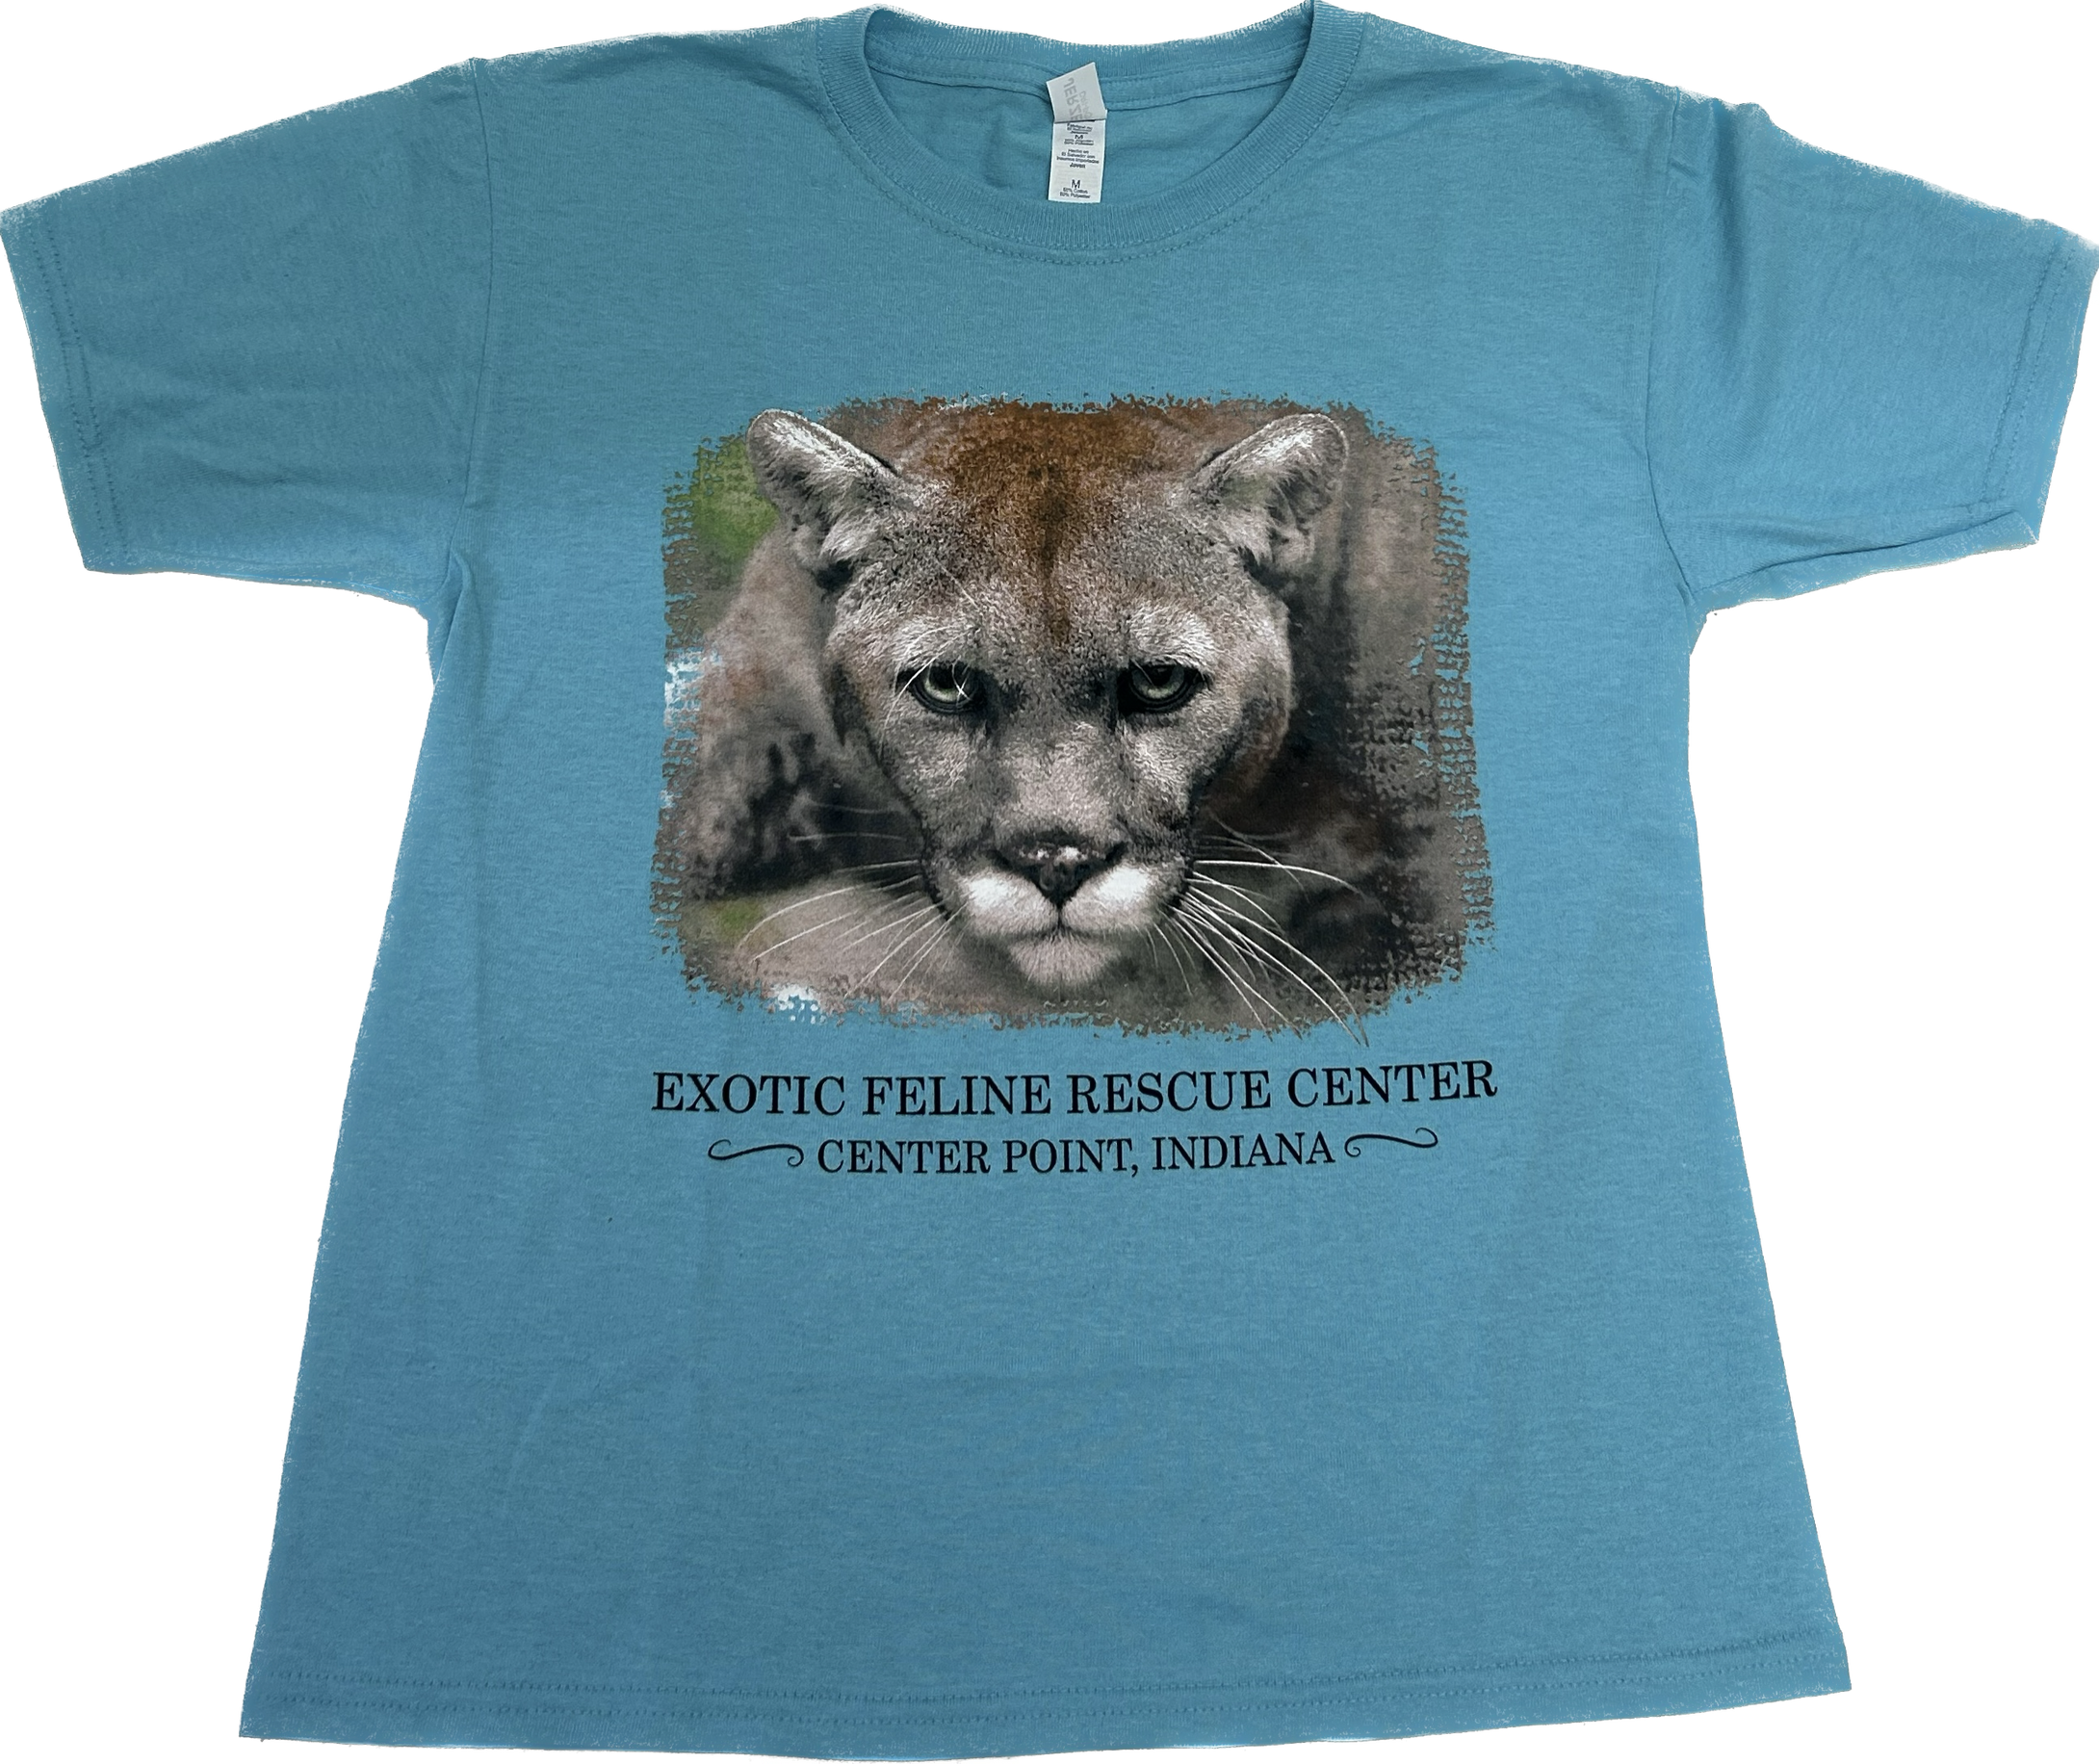 Zoey Cougar on Teal T-Shirt